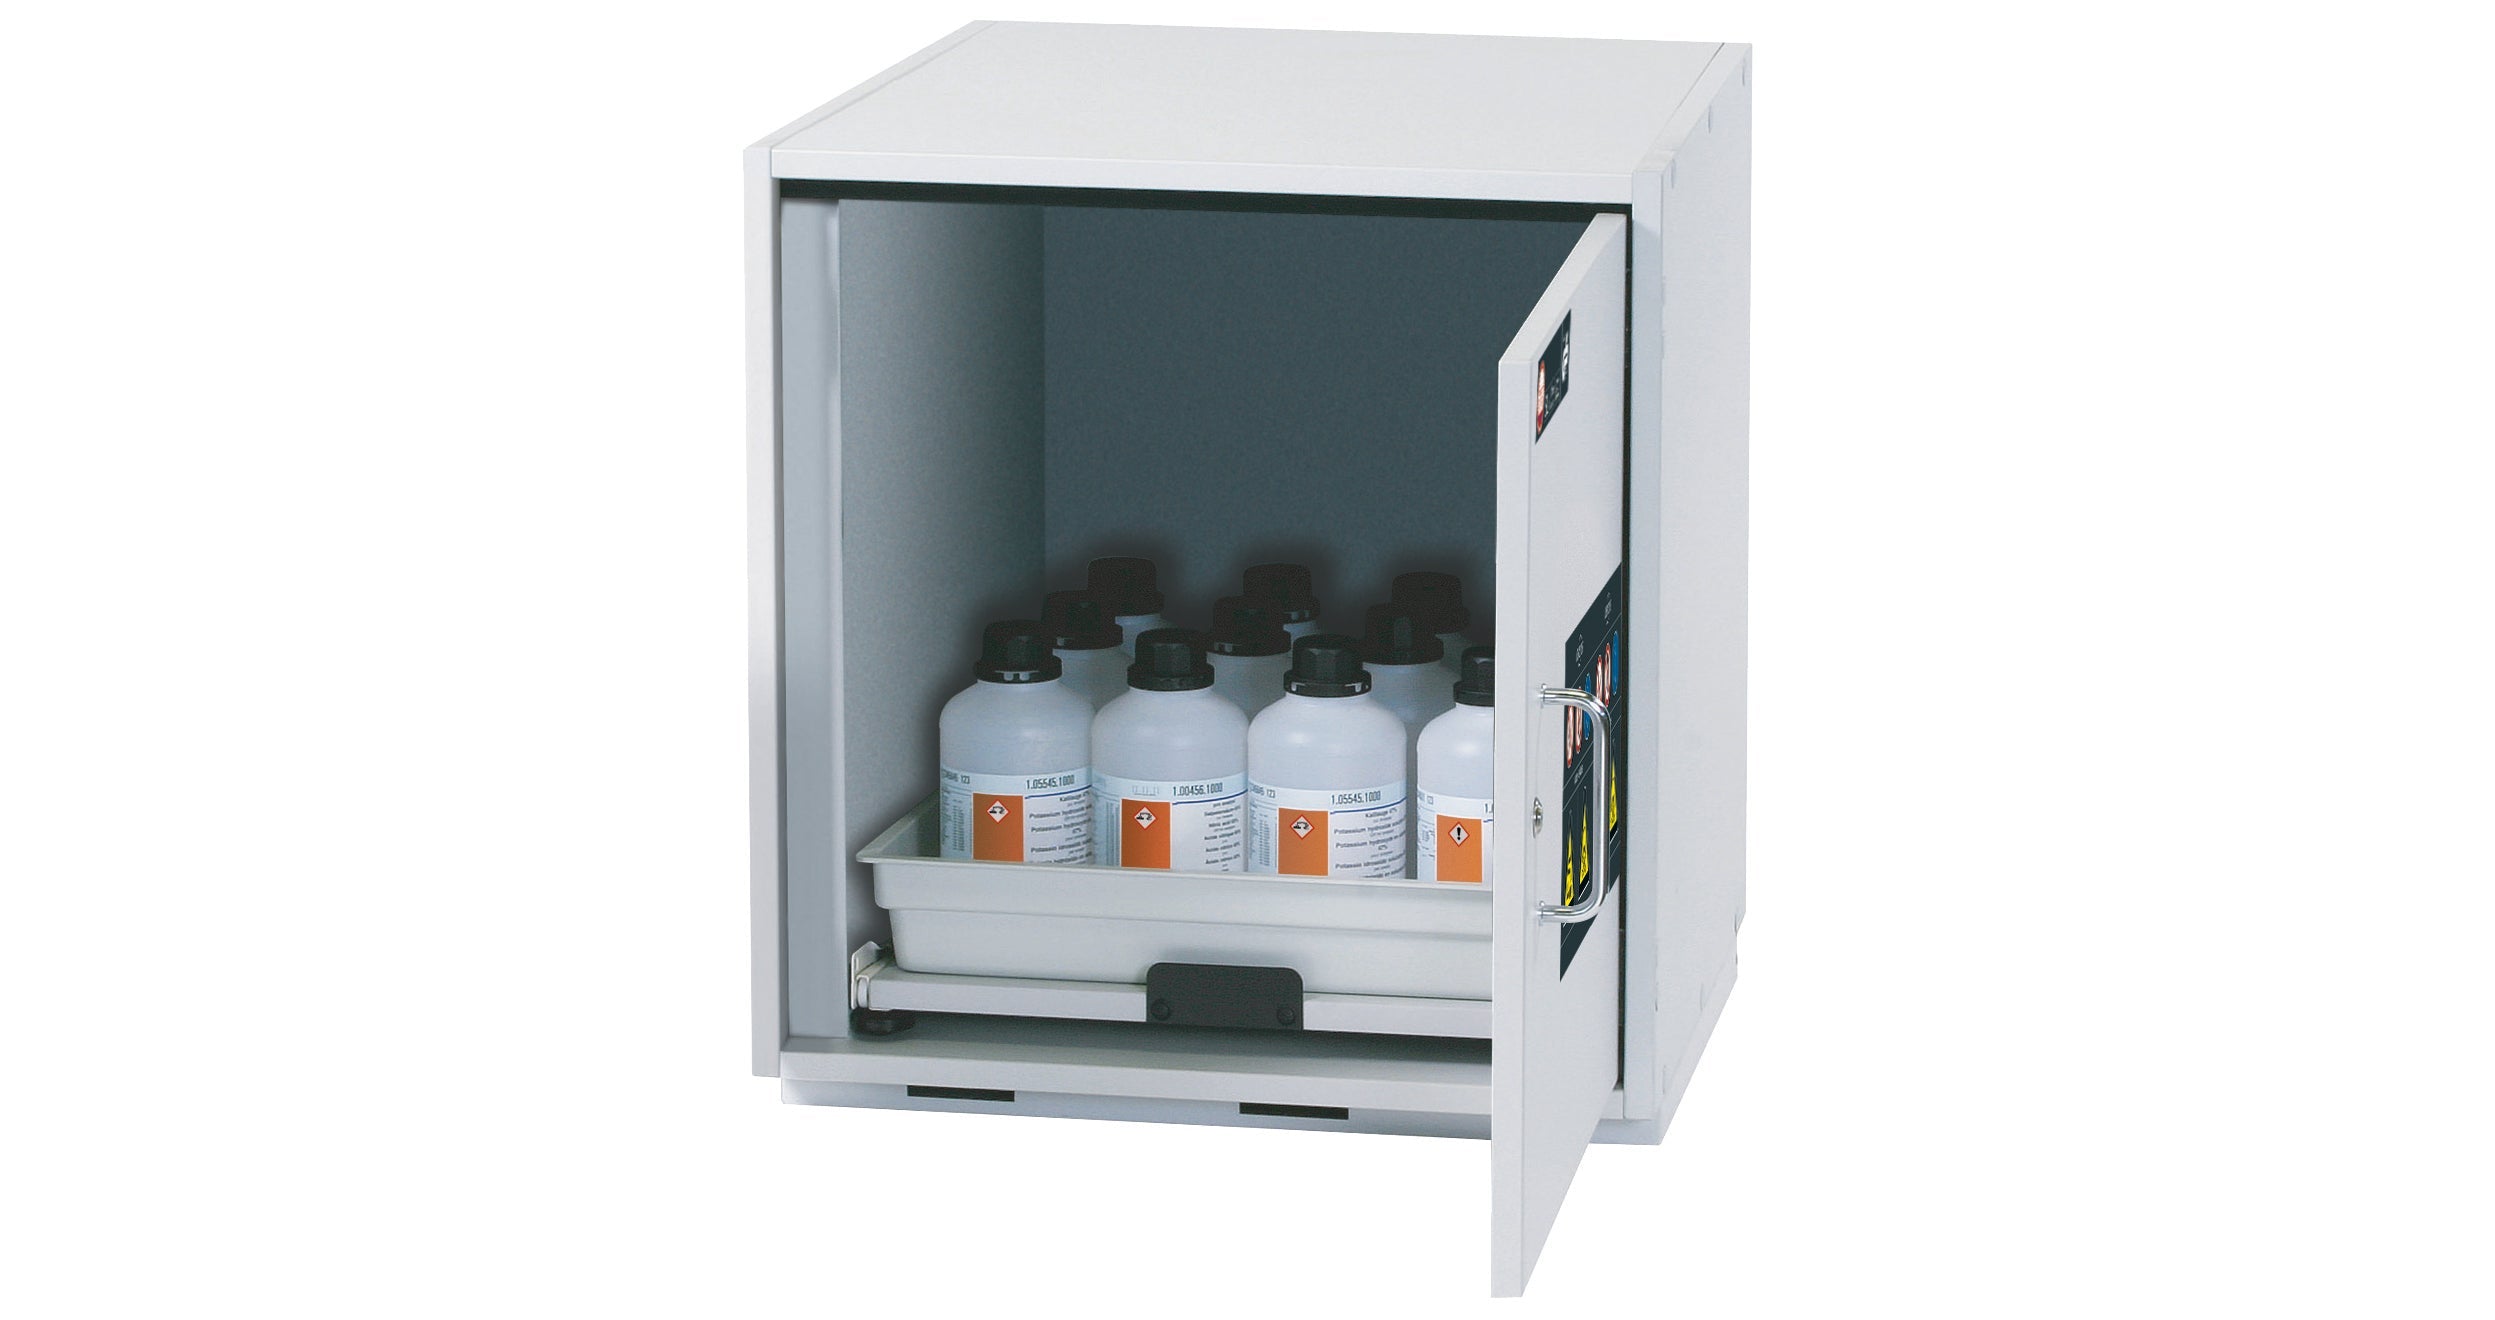 Acid and alkali base cabinet SL-CLASSIC-UB model SL.060.059.UB.TR in light gray with 1x AbZ shelf pull-out (FP plate/polypropylene)